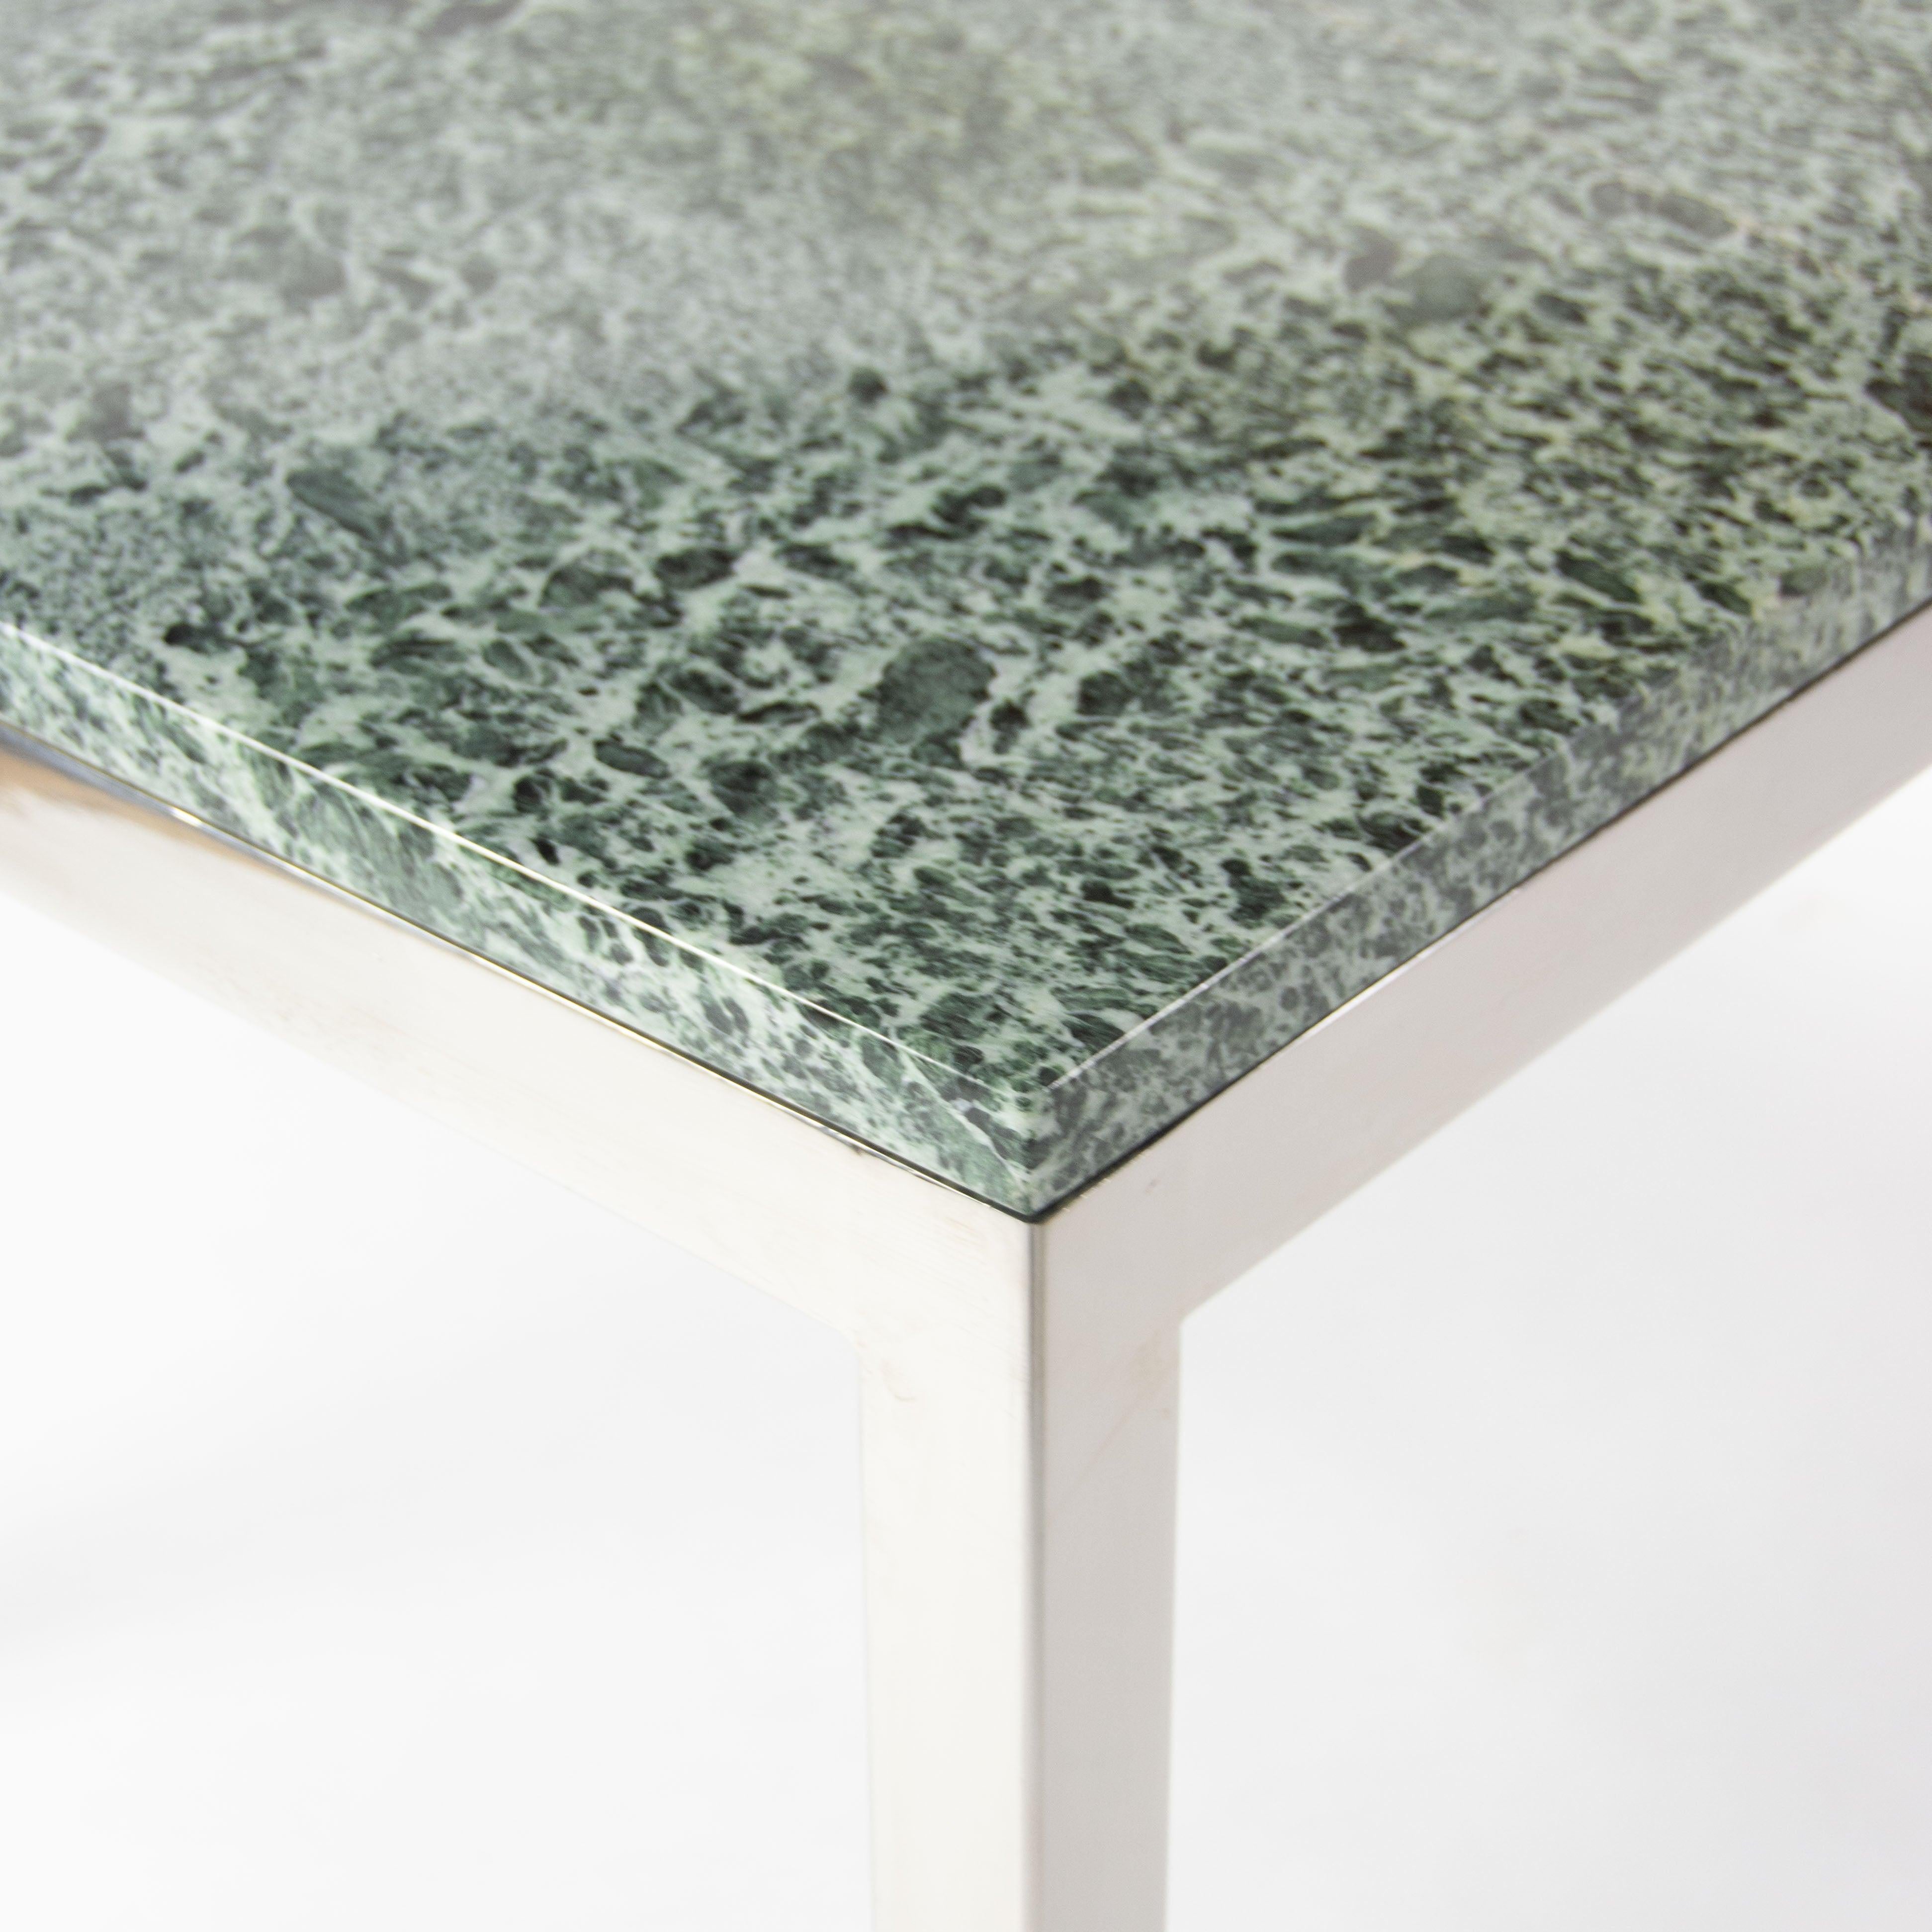 American Green Granite Cumberland Meeting Dining Conference Tables Steel Base For Sale